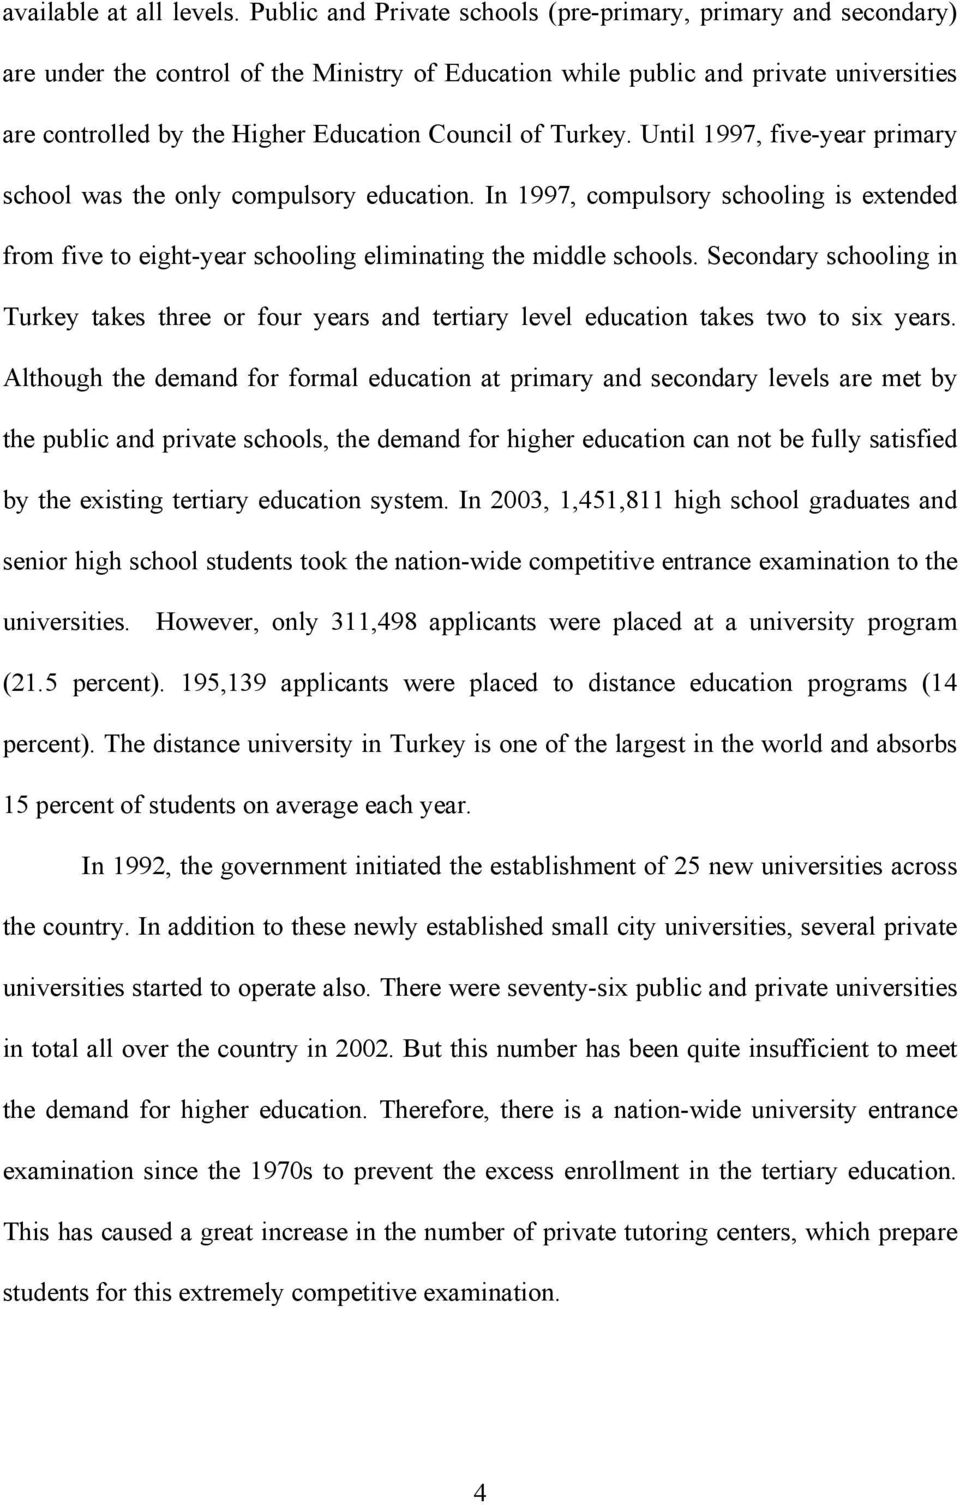 of Turkey. Until 1997, five-year primary school was the only compulsory education. In 1997, compulsory schooling is extended from five to eight-year schooling eliminating the middle schools.